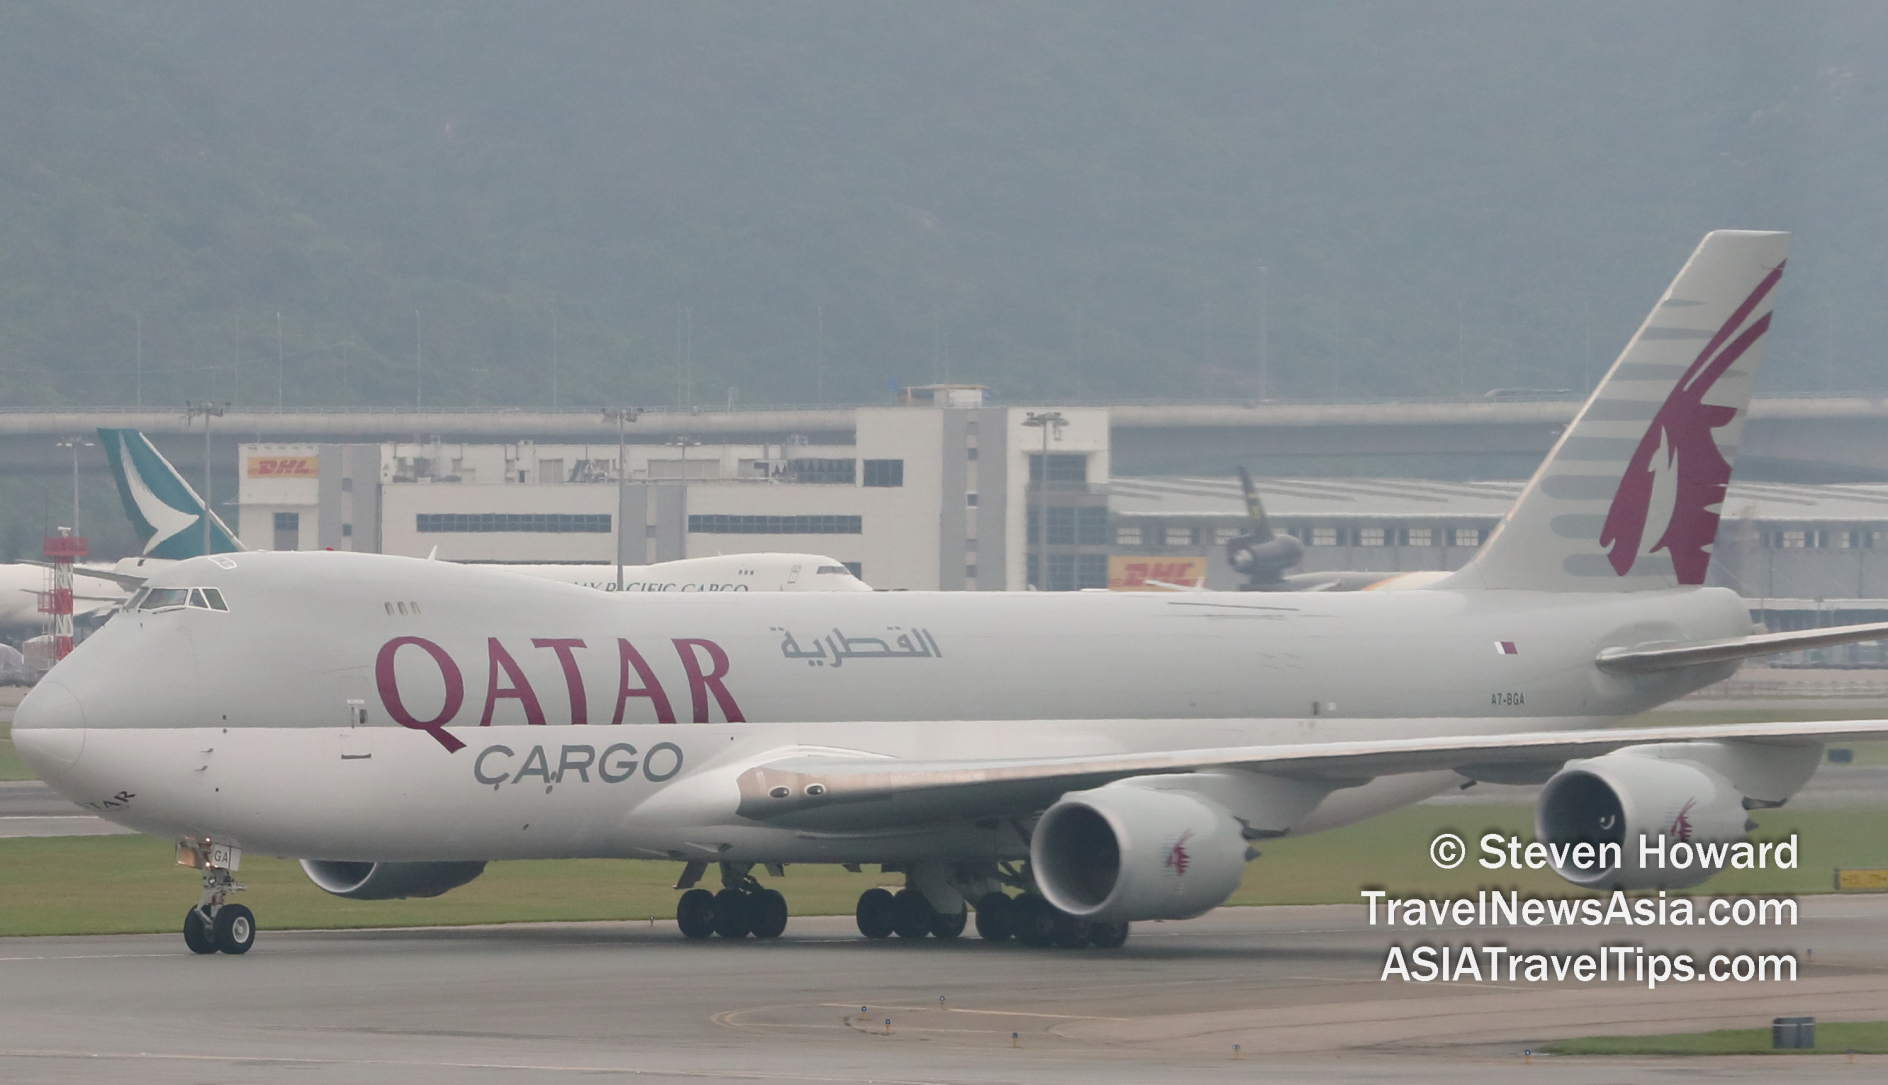 Qatar Airways B747-8F reg: A7-BGA at HKIA. Picture by Steven Howard of TravelNewsAsia.com Click to enlarge.